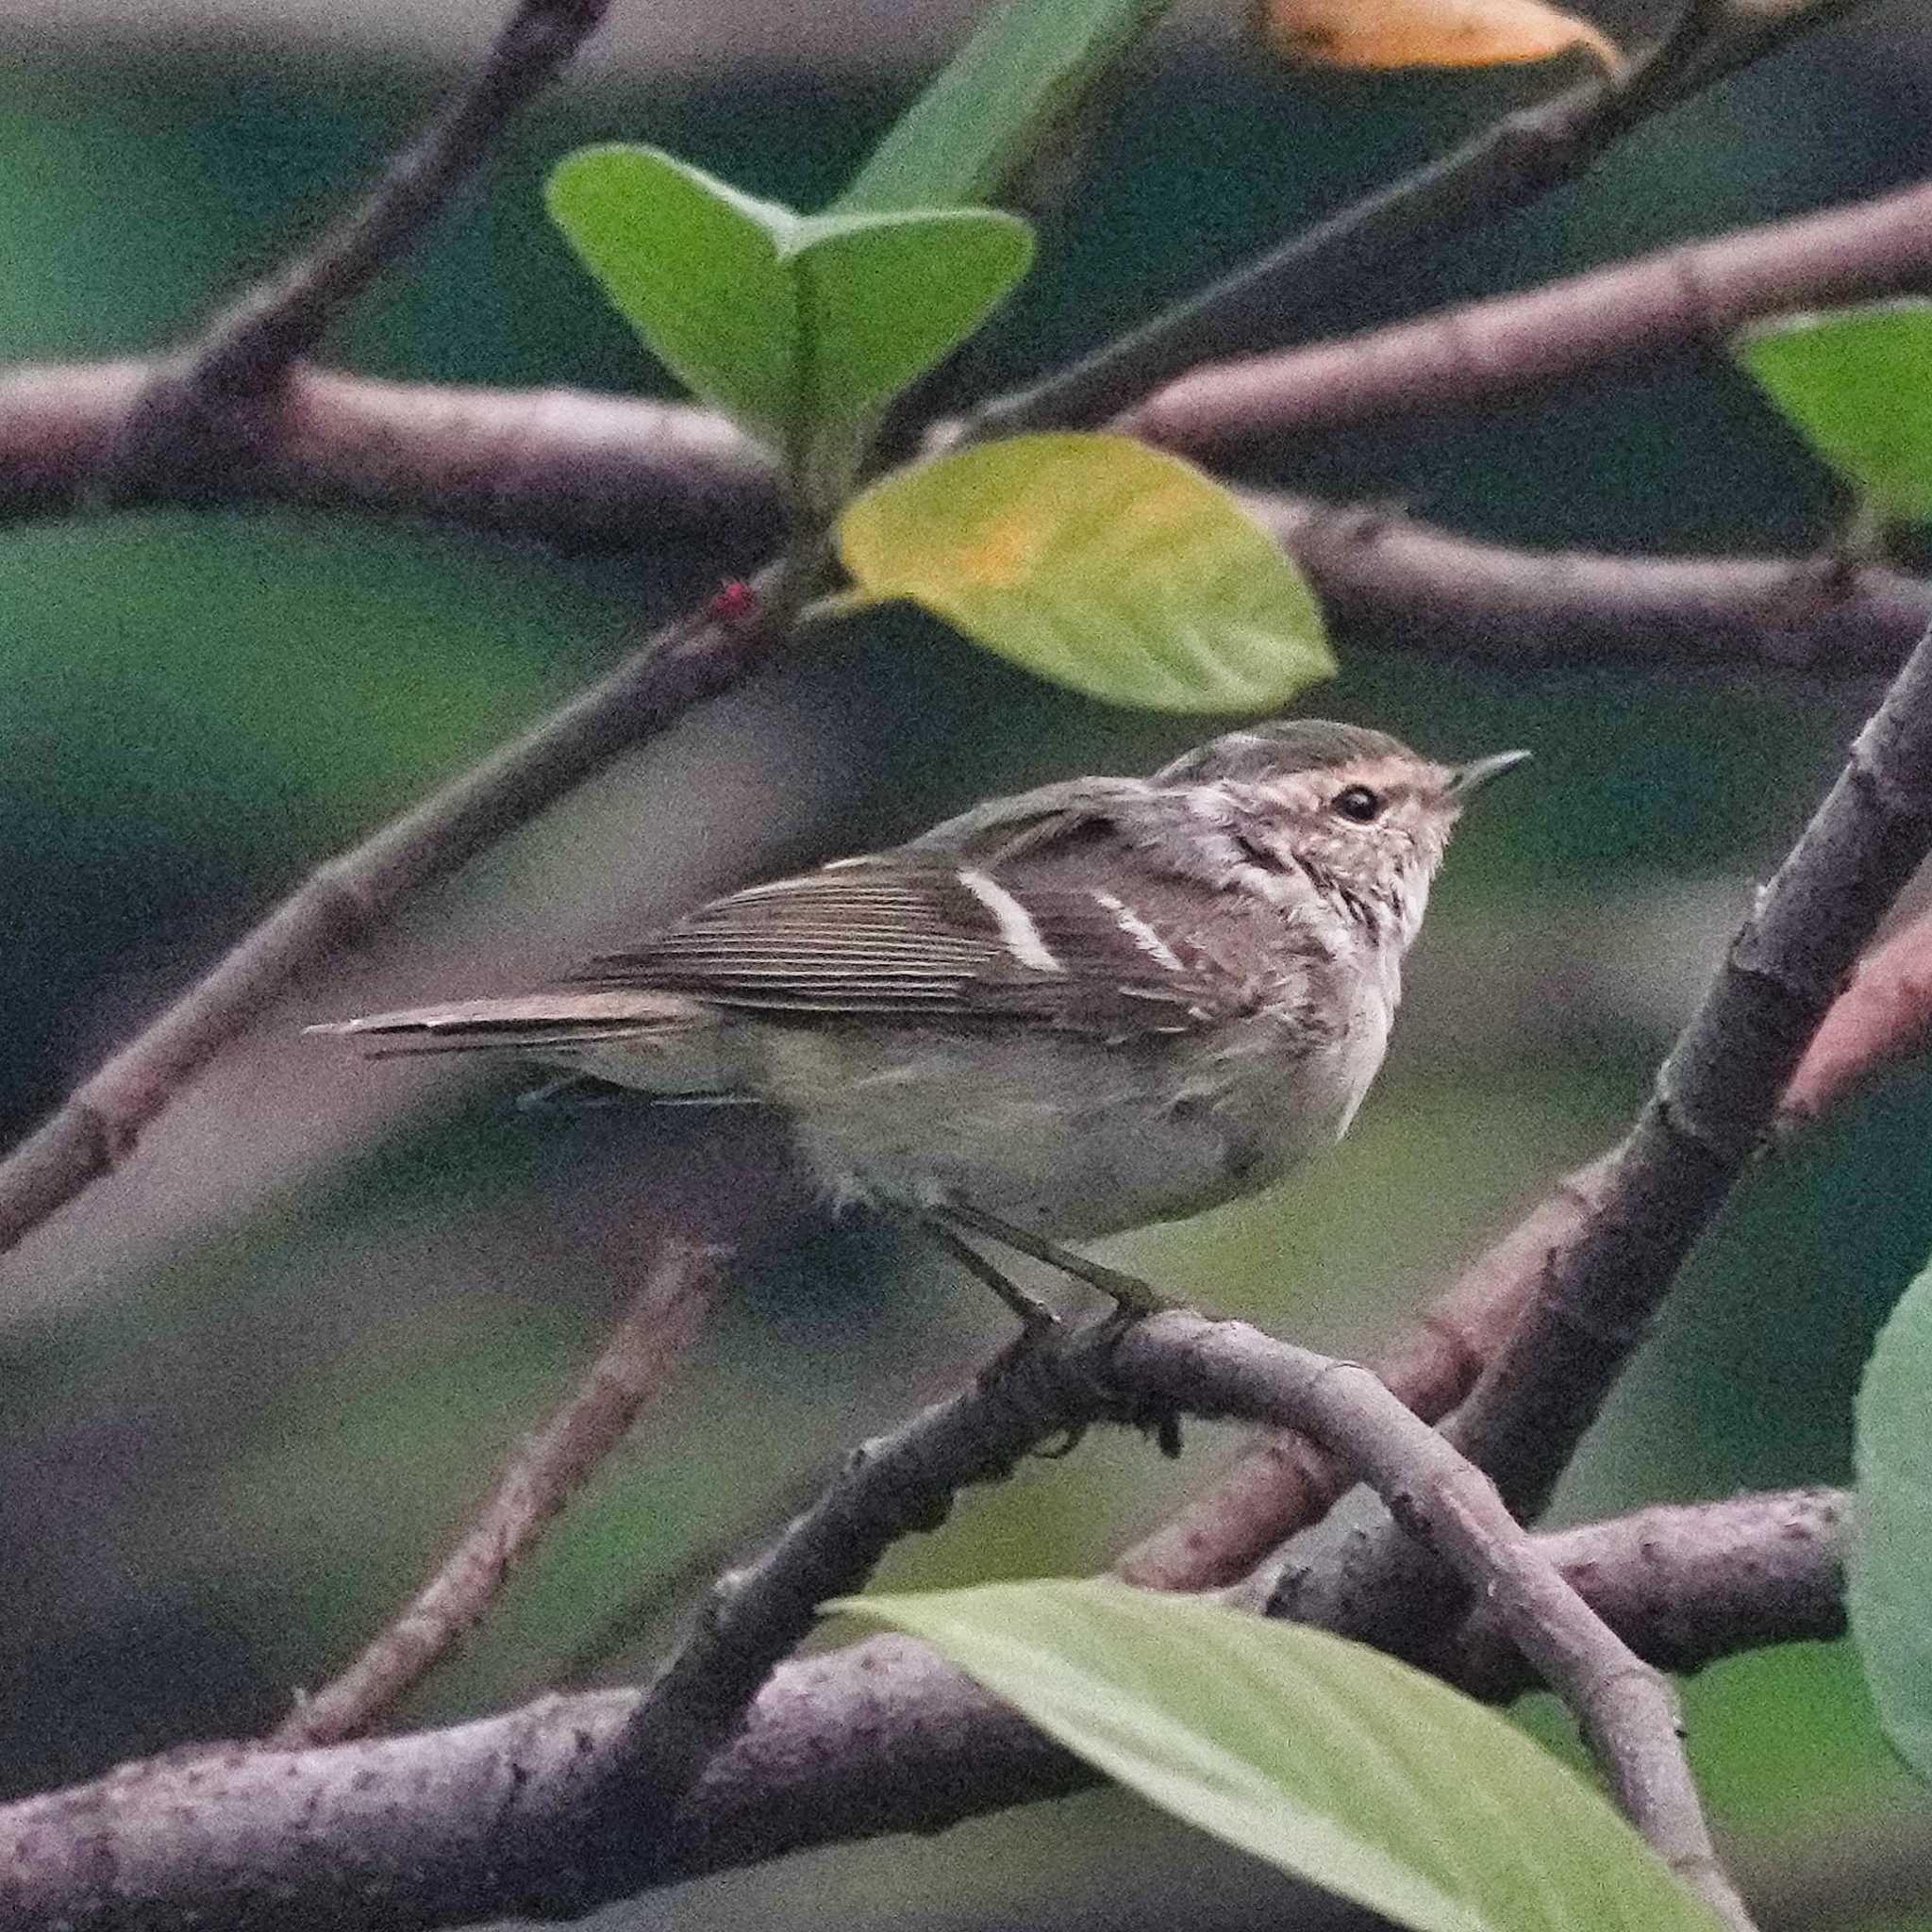 Photo of Chinese Leaf Warbler at Tham Pla National Park by span265